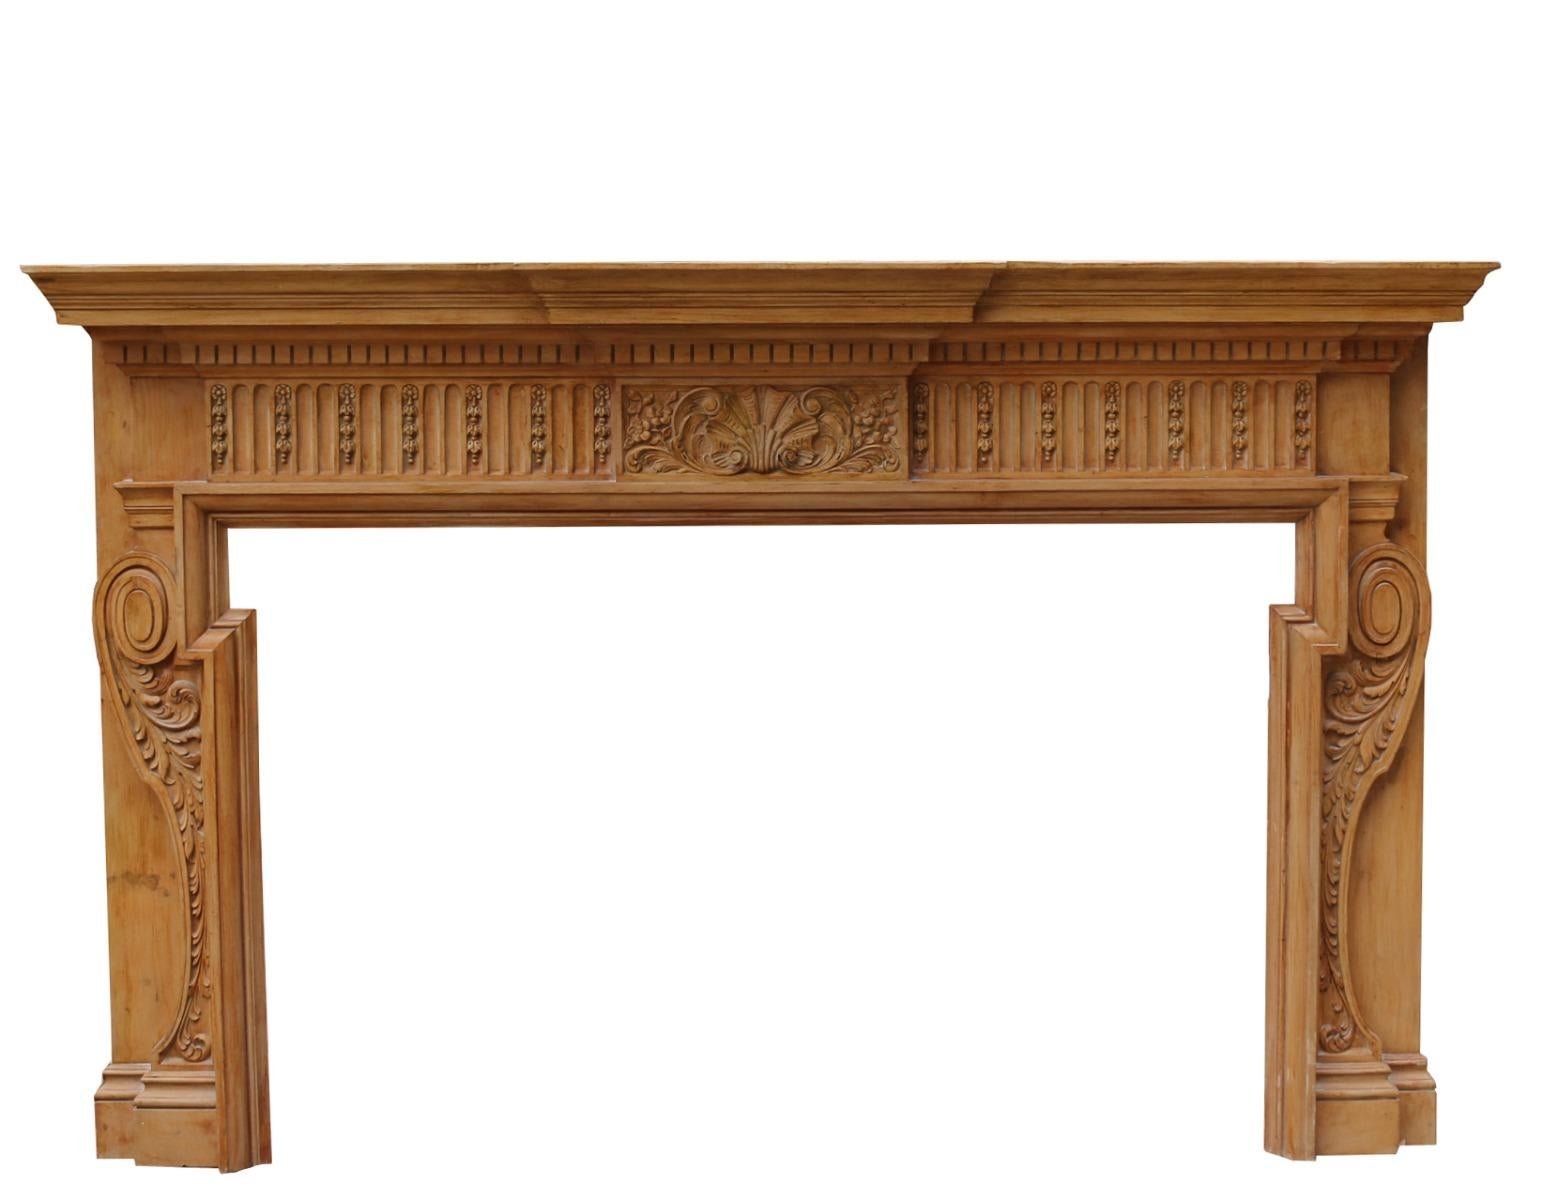 This fire surround has a stripped and waxed finish.

Measures: Opening height 81 cm

Opening width 125 cm

Width between iutside of legs 169.5 cm.